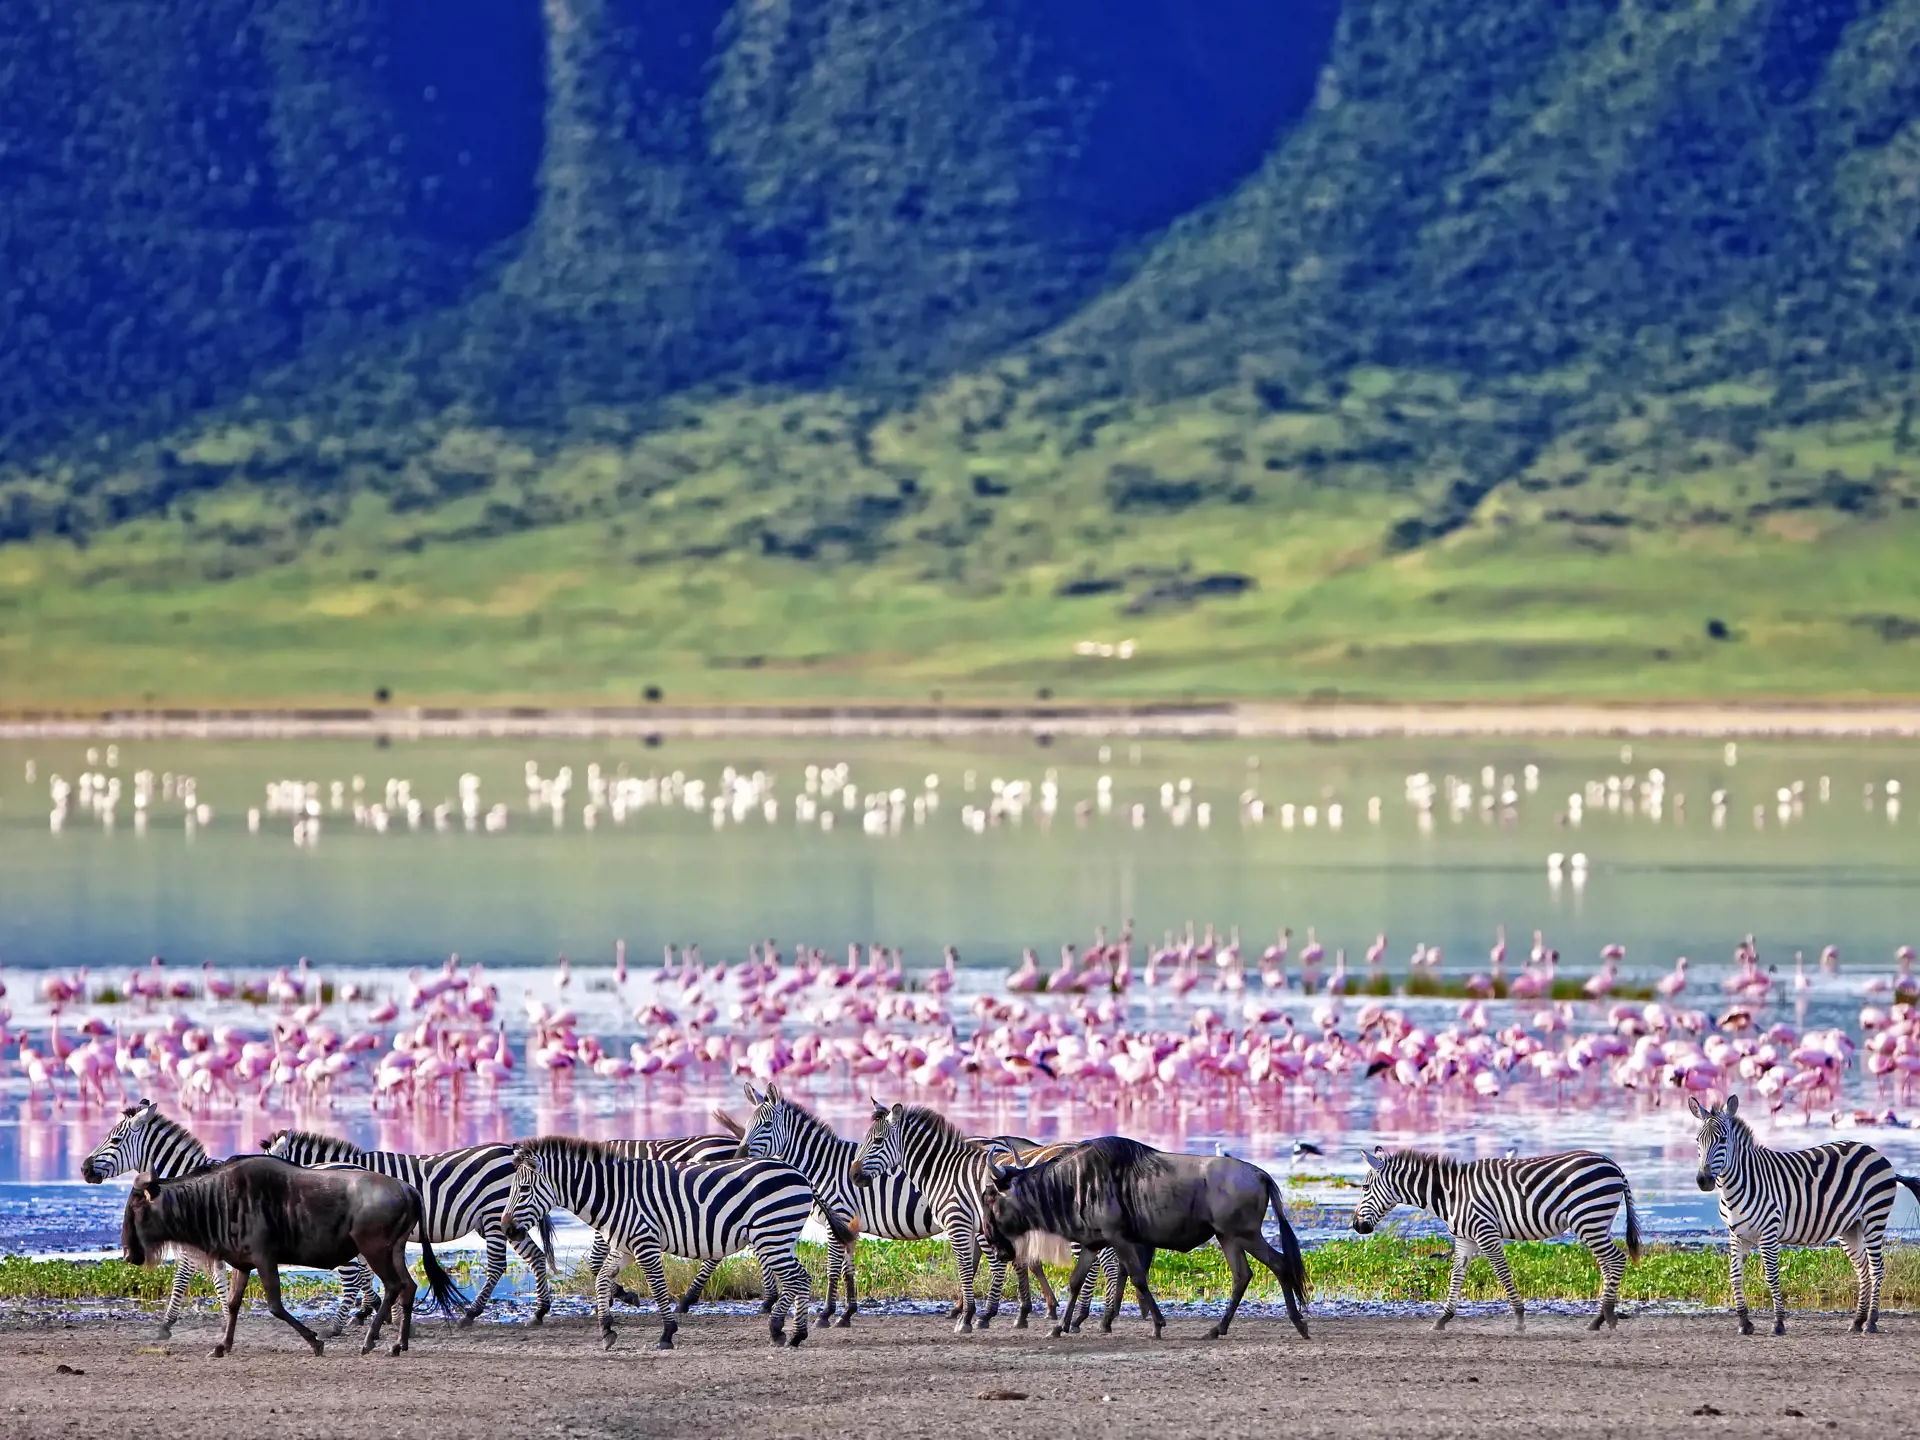 shutterstock_212602420 Zebras and wildebeests walking beside the lake in the Ngorongoro Crater, Tanzania, flamingos in the background.jpg